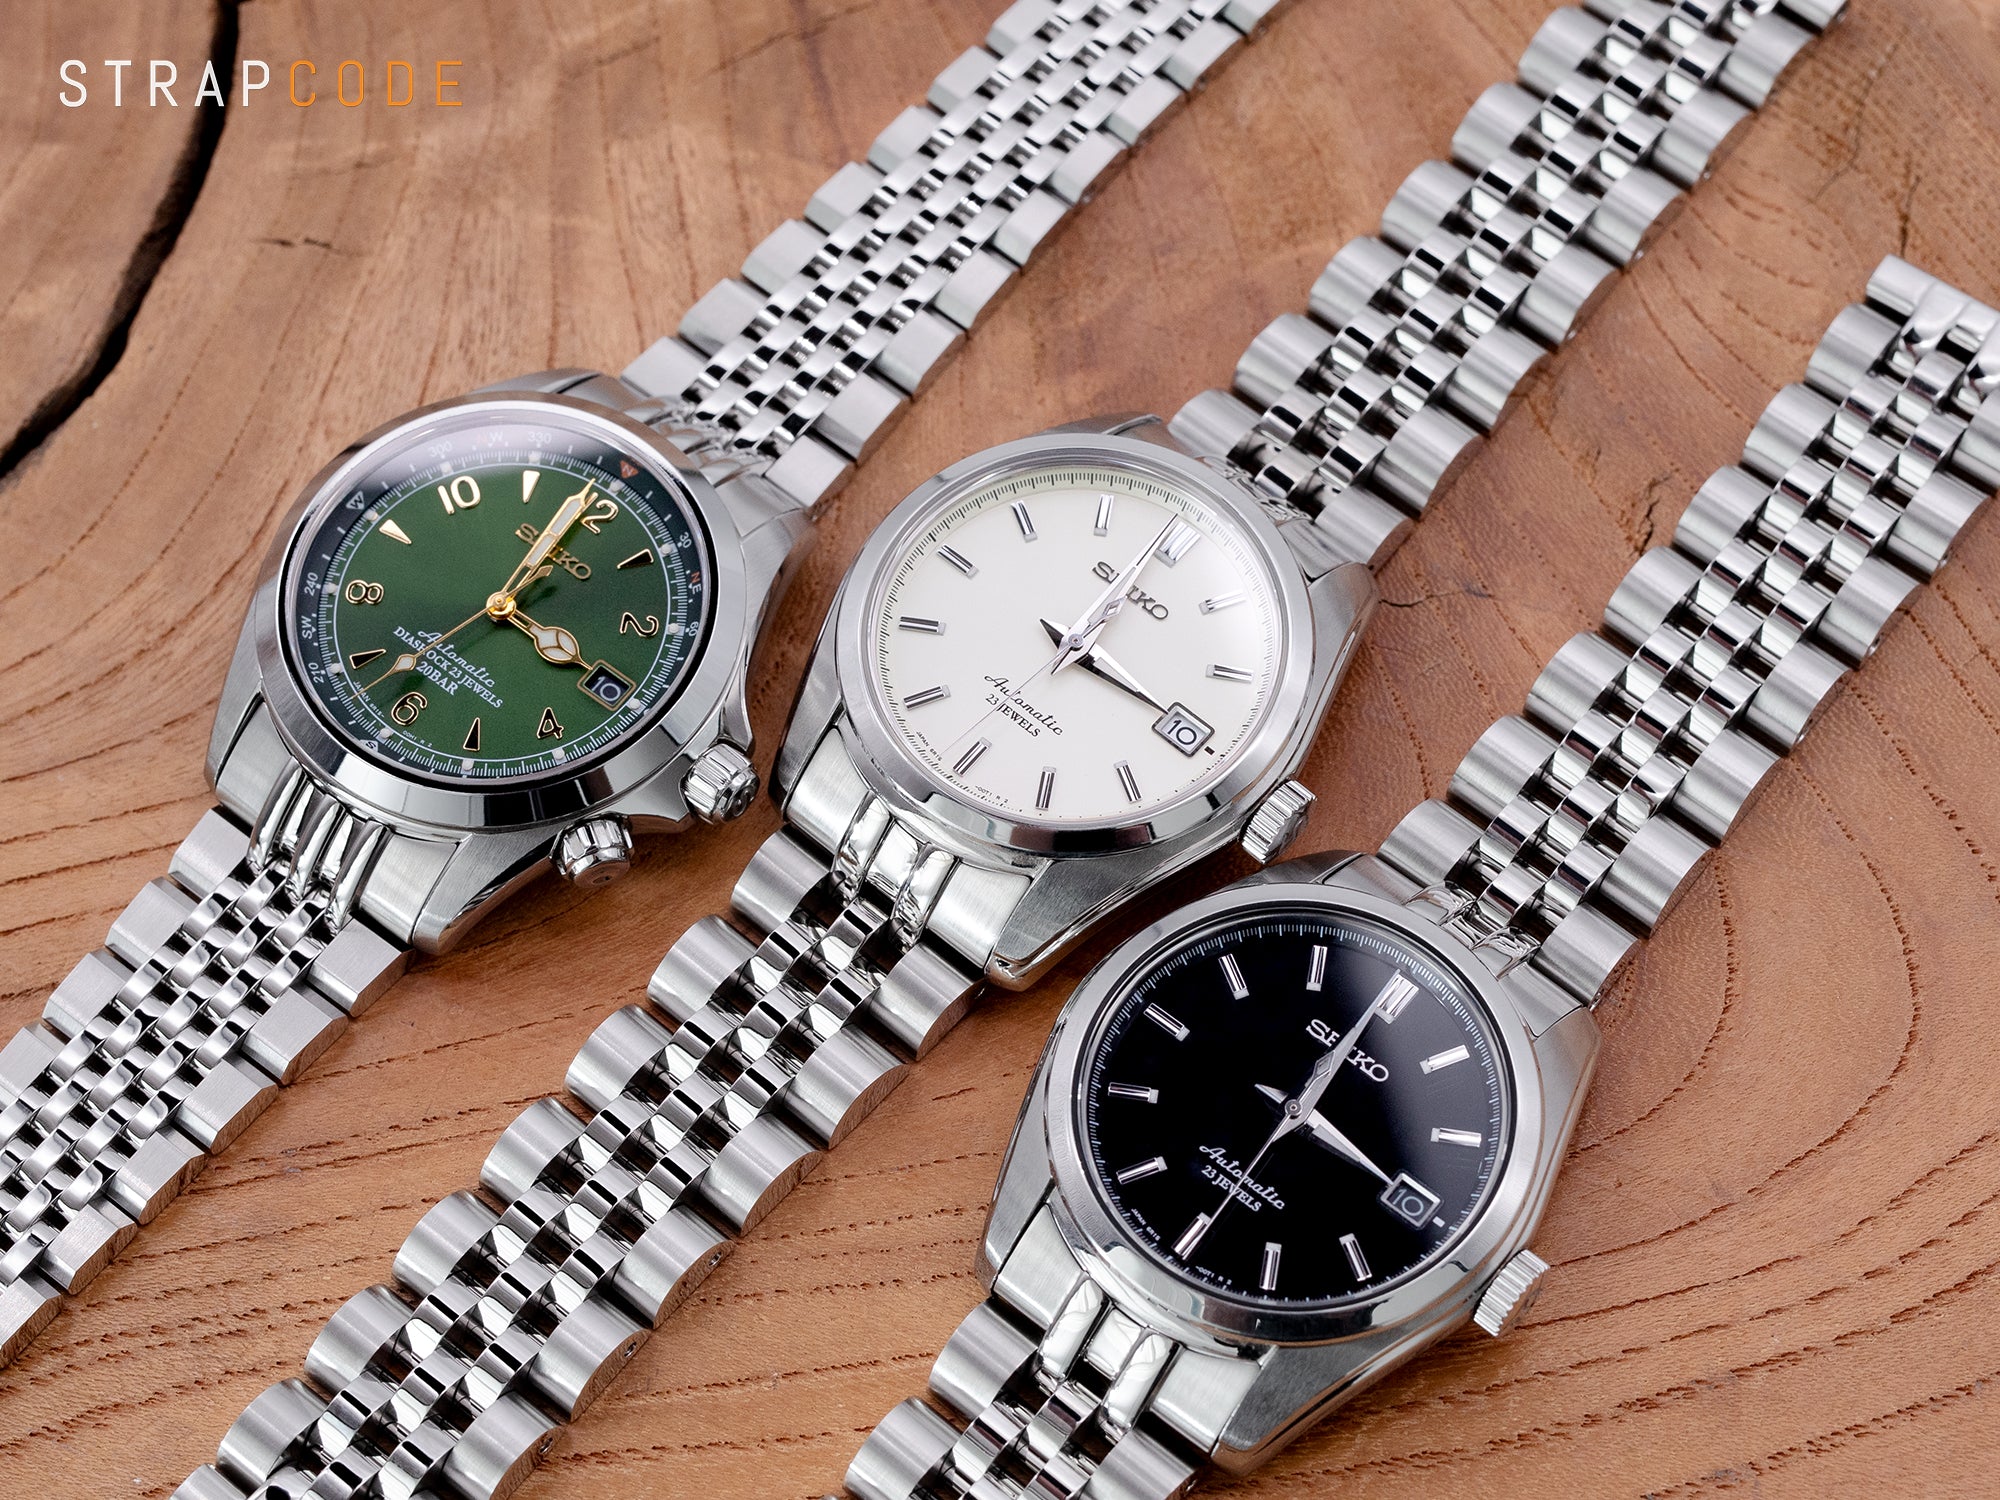 Salute to all of the Seiko SARB Watches | Strapcode watch bands